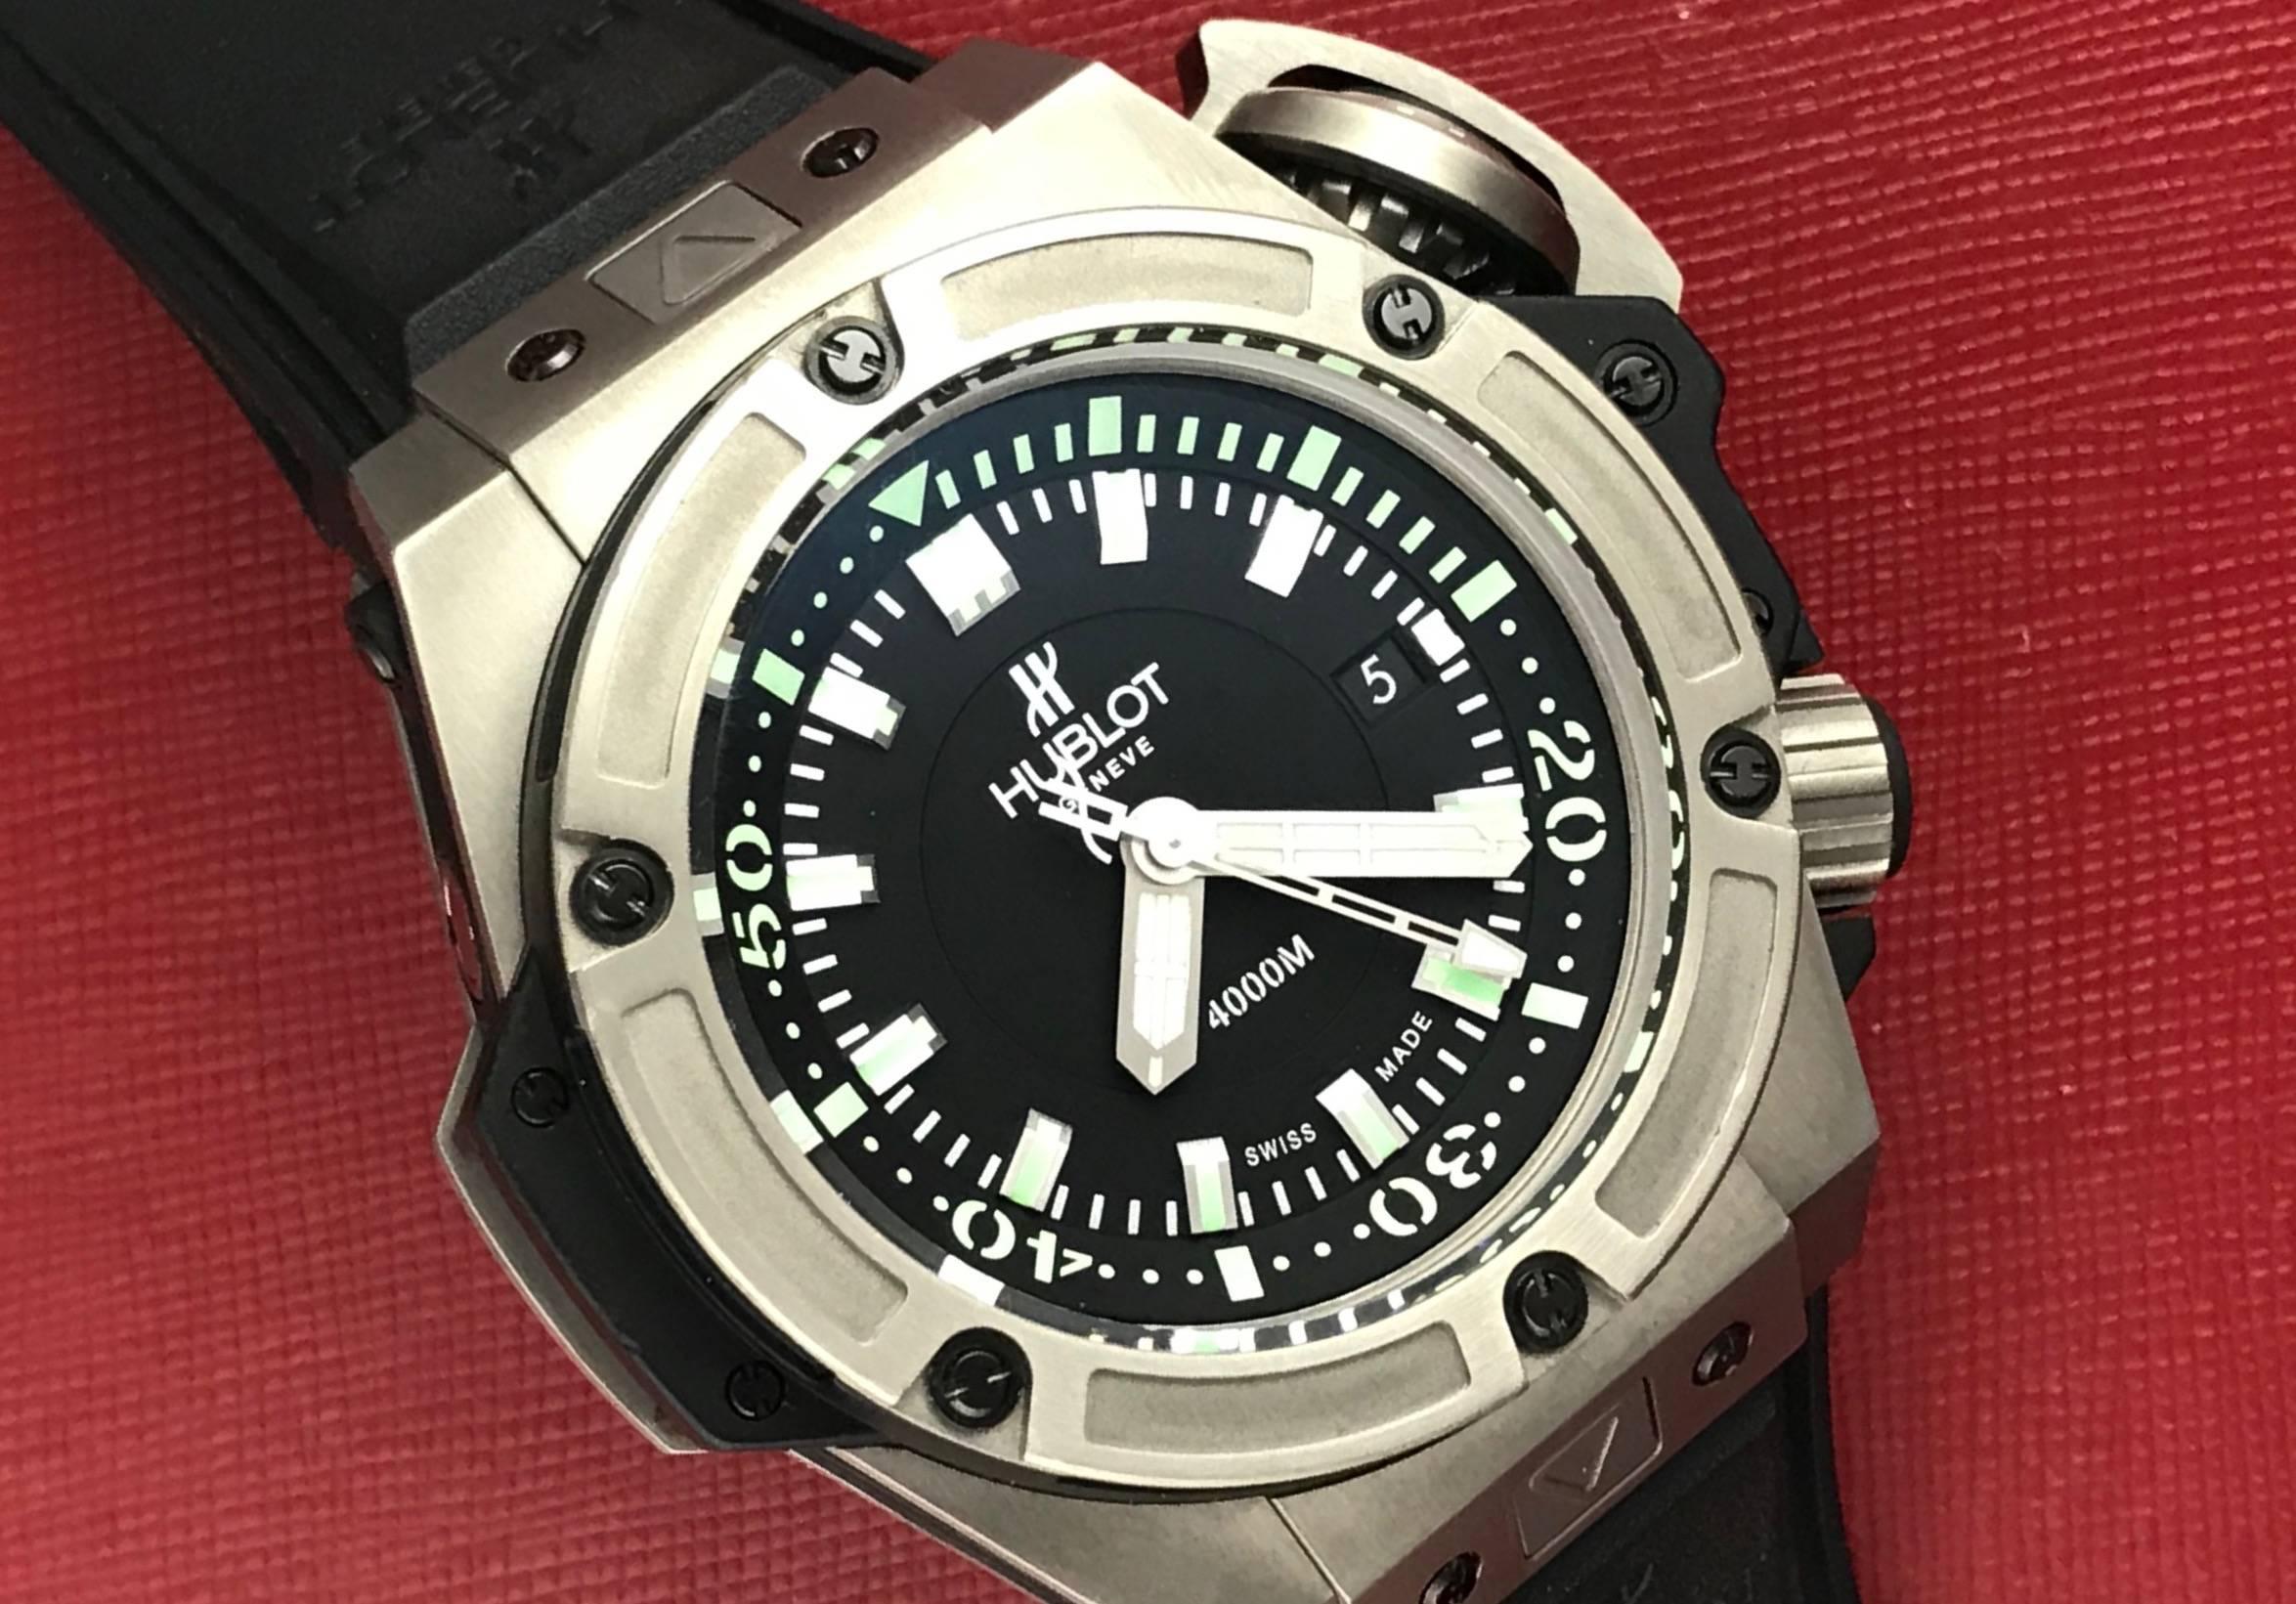 Hublot Musee Oceanographique Monaco Ref 731.NX.1190.RX, Certified Pre-Owned Mens automatic wrist watch. Hublot Self Winding Caliber HUB 1400 Movement with black dial and Titanium and black ceramic case with inner rotatable diver's bezel (48mm).